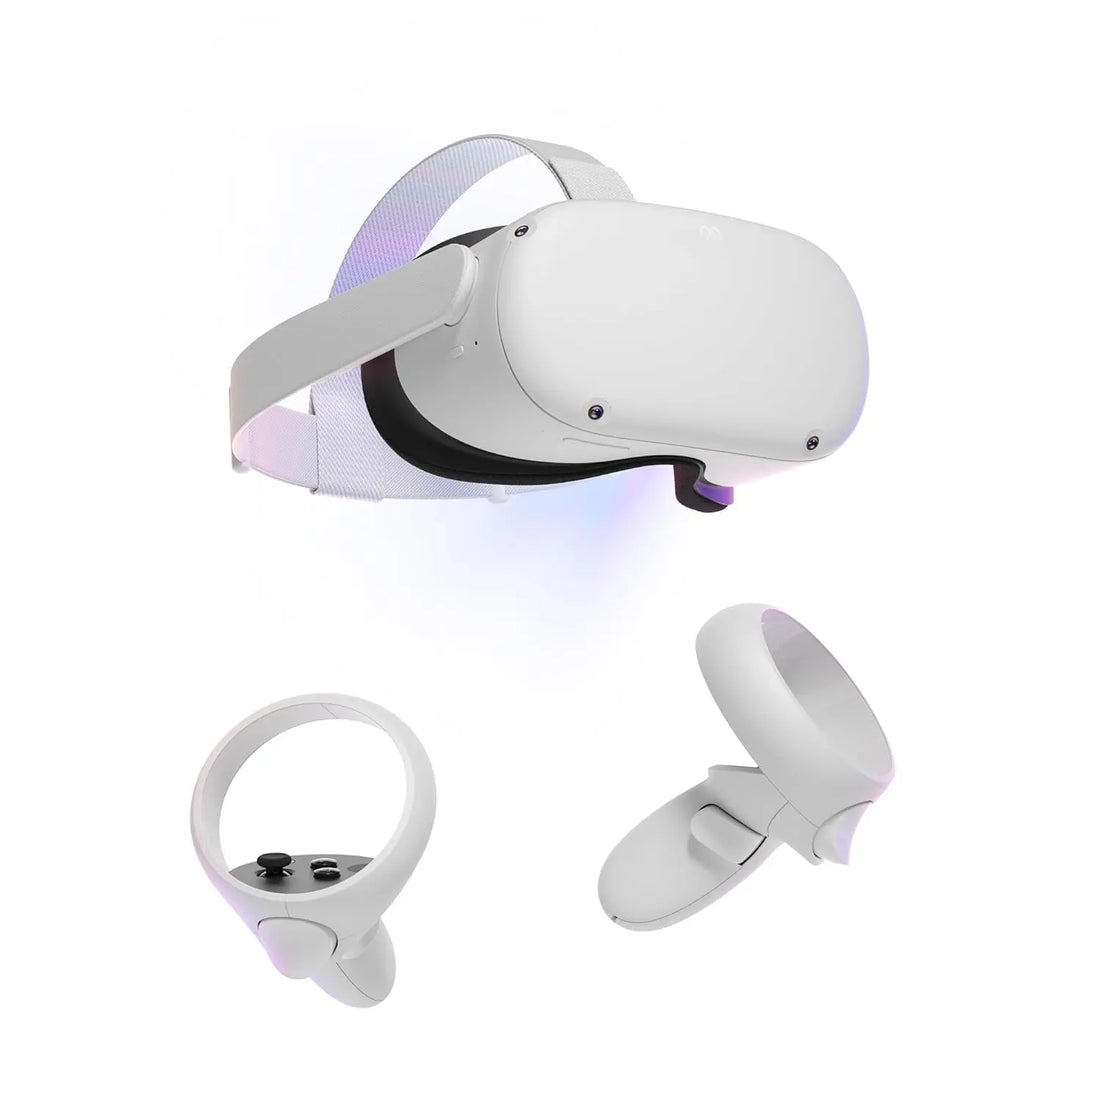 Quest 2 — Advanced All-In-One Virtual Reality Headset — 256 GB - Mary’s TT Shop